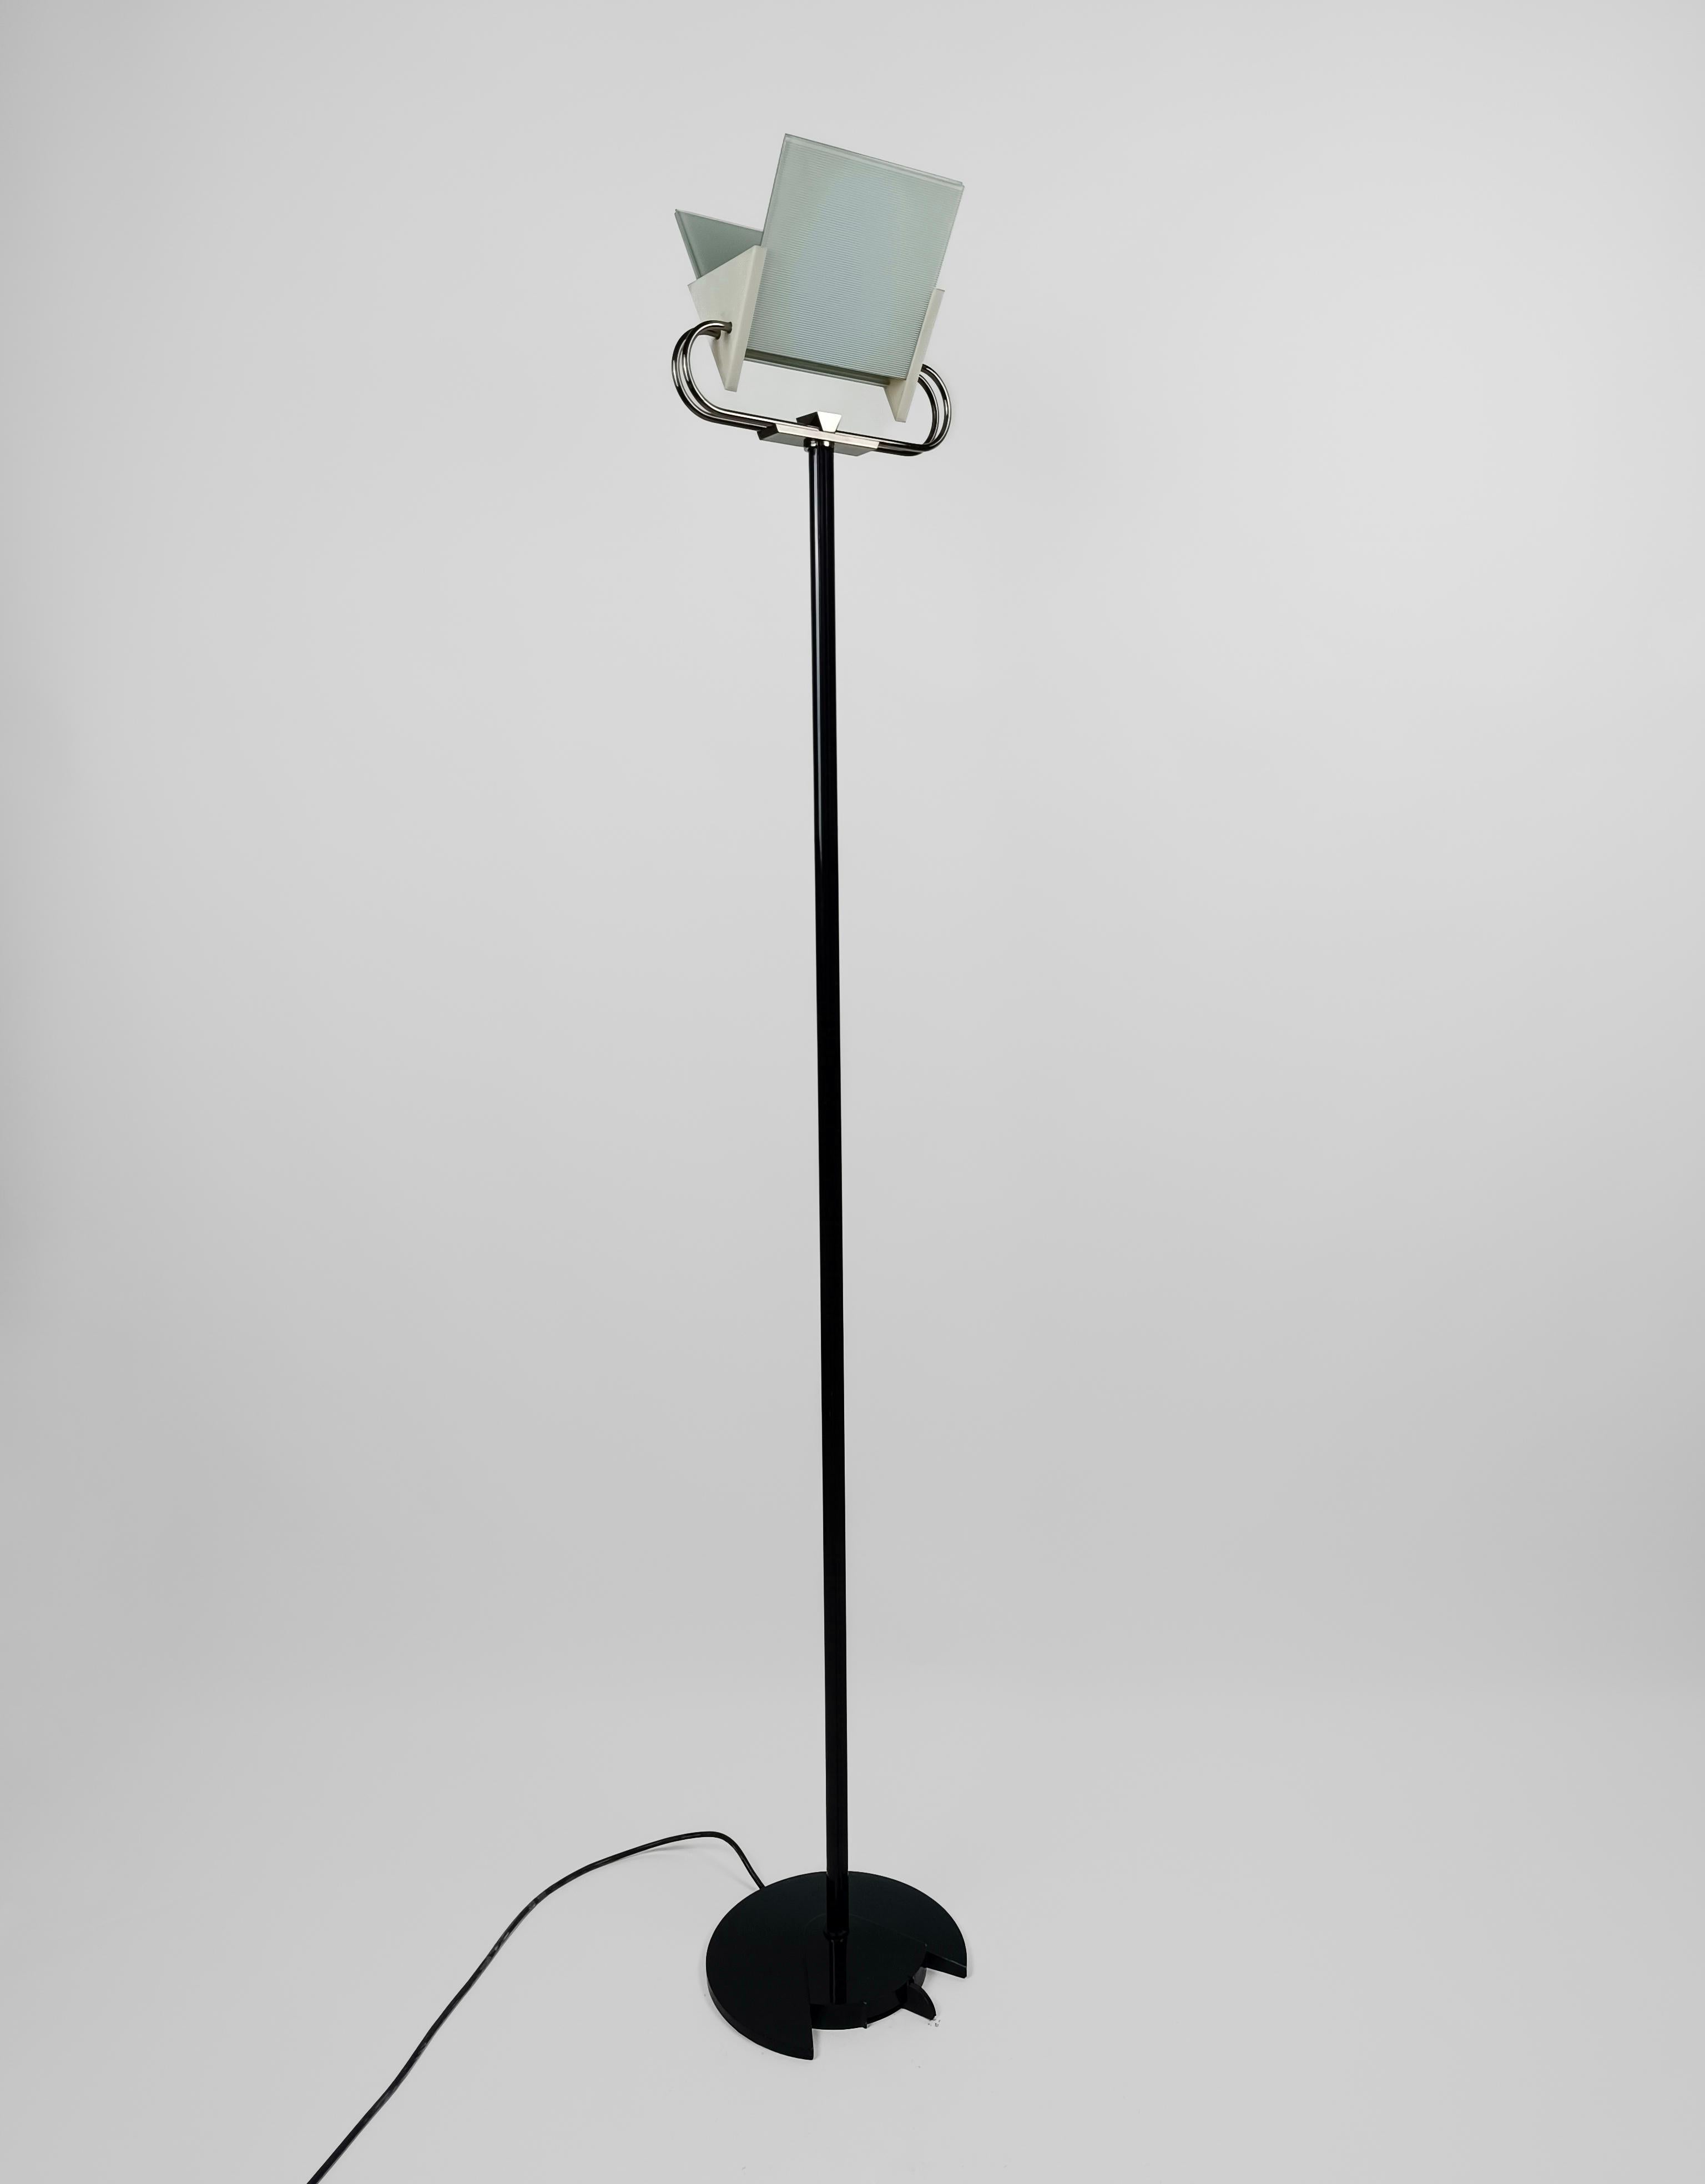 A Post Modern floor lamp of great charm, made in Italy by the historic lighting company Arteluce founded in 1939 by Gino Sarfatti.
Designed and produced during the 80s, this floor lamp features many of the typical elements of the period and the